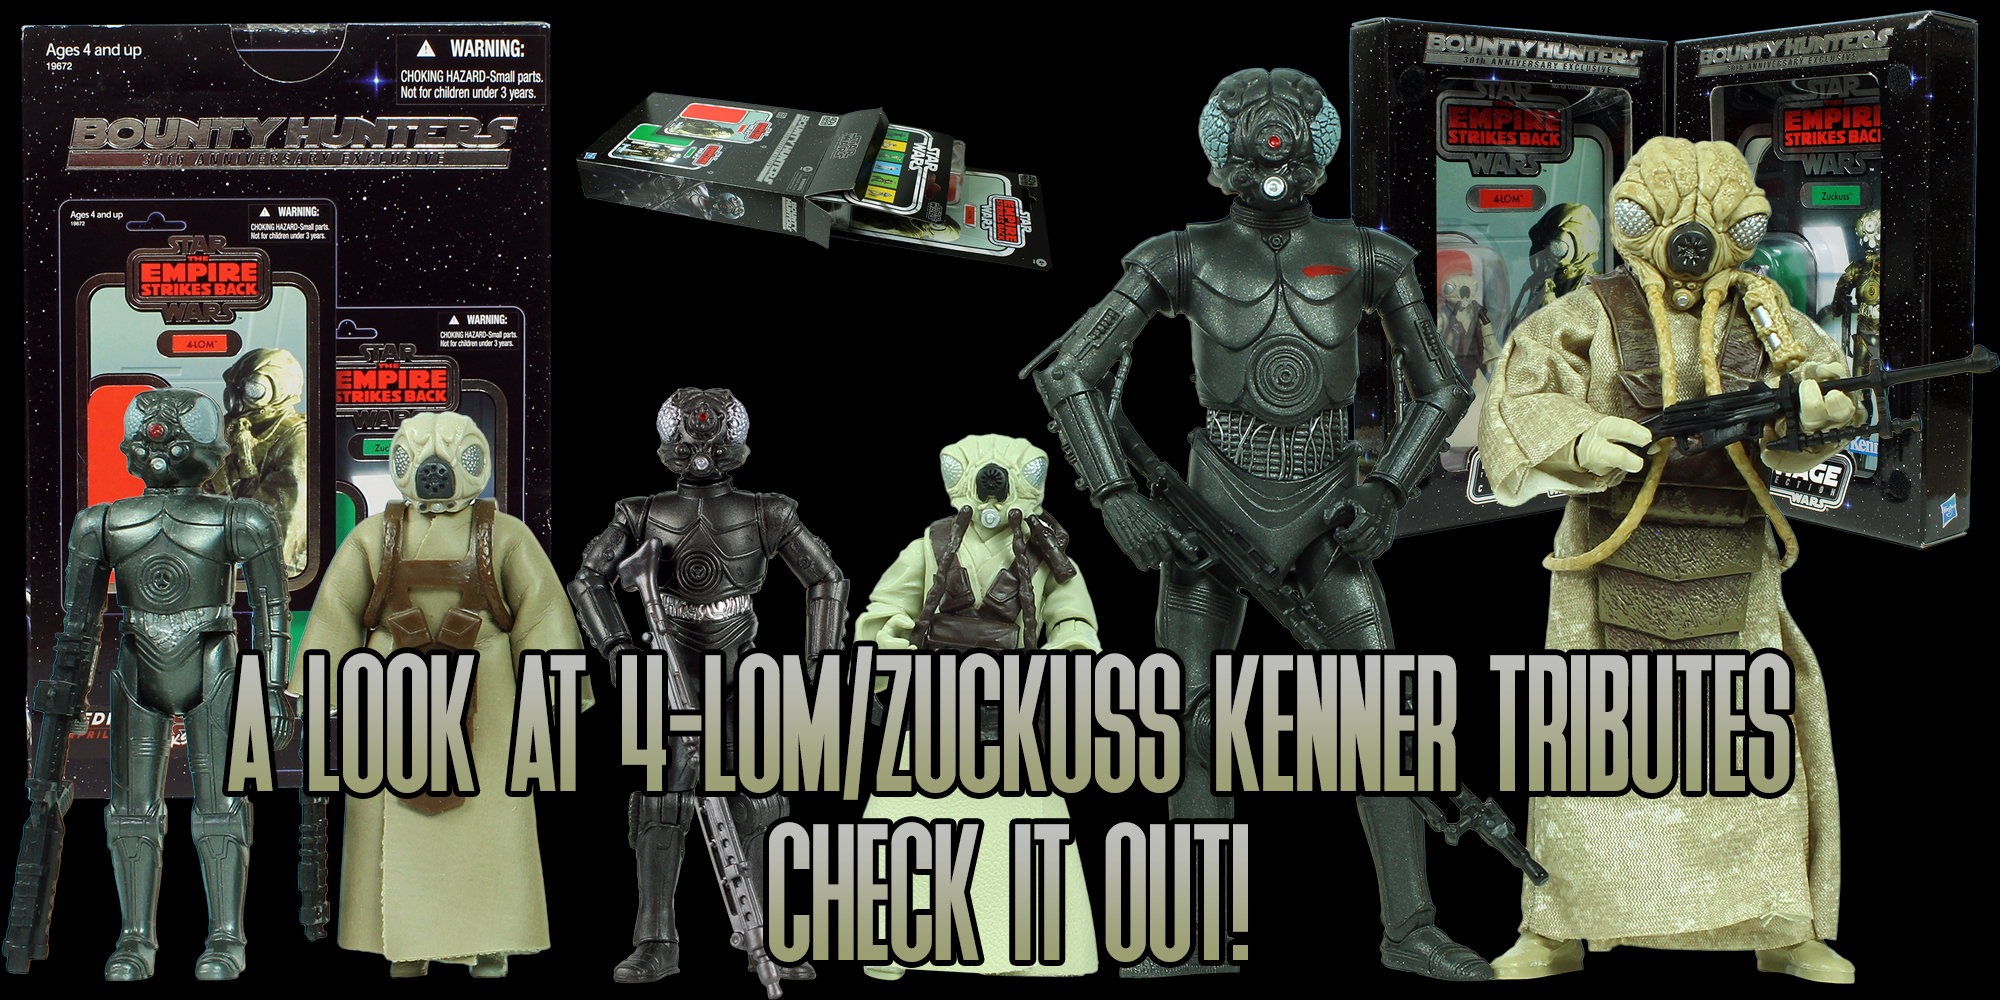 A Look At 4-LOM And Zuckuss Kenner Tributes